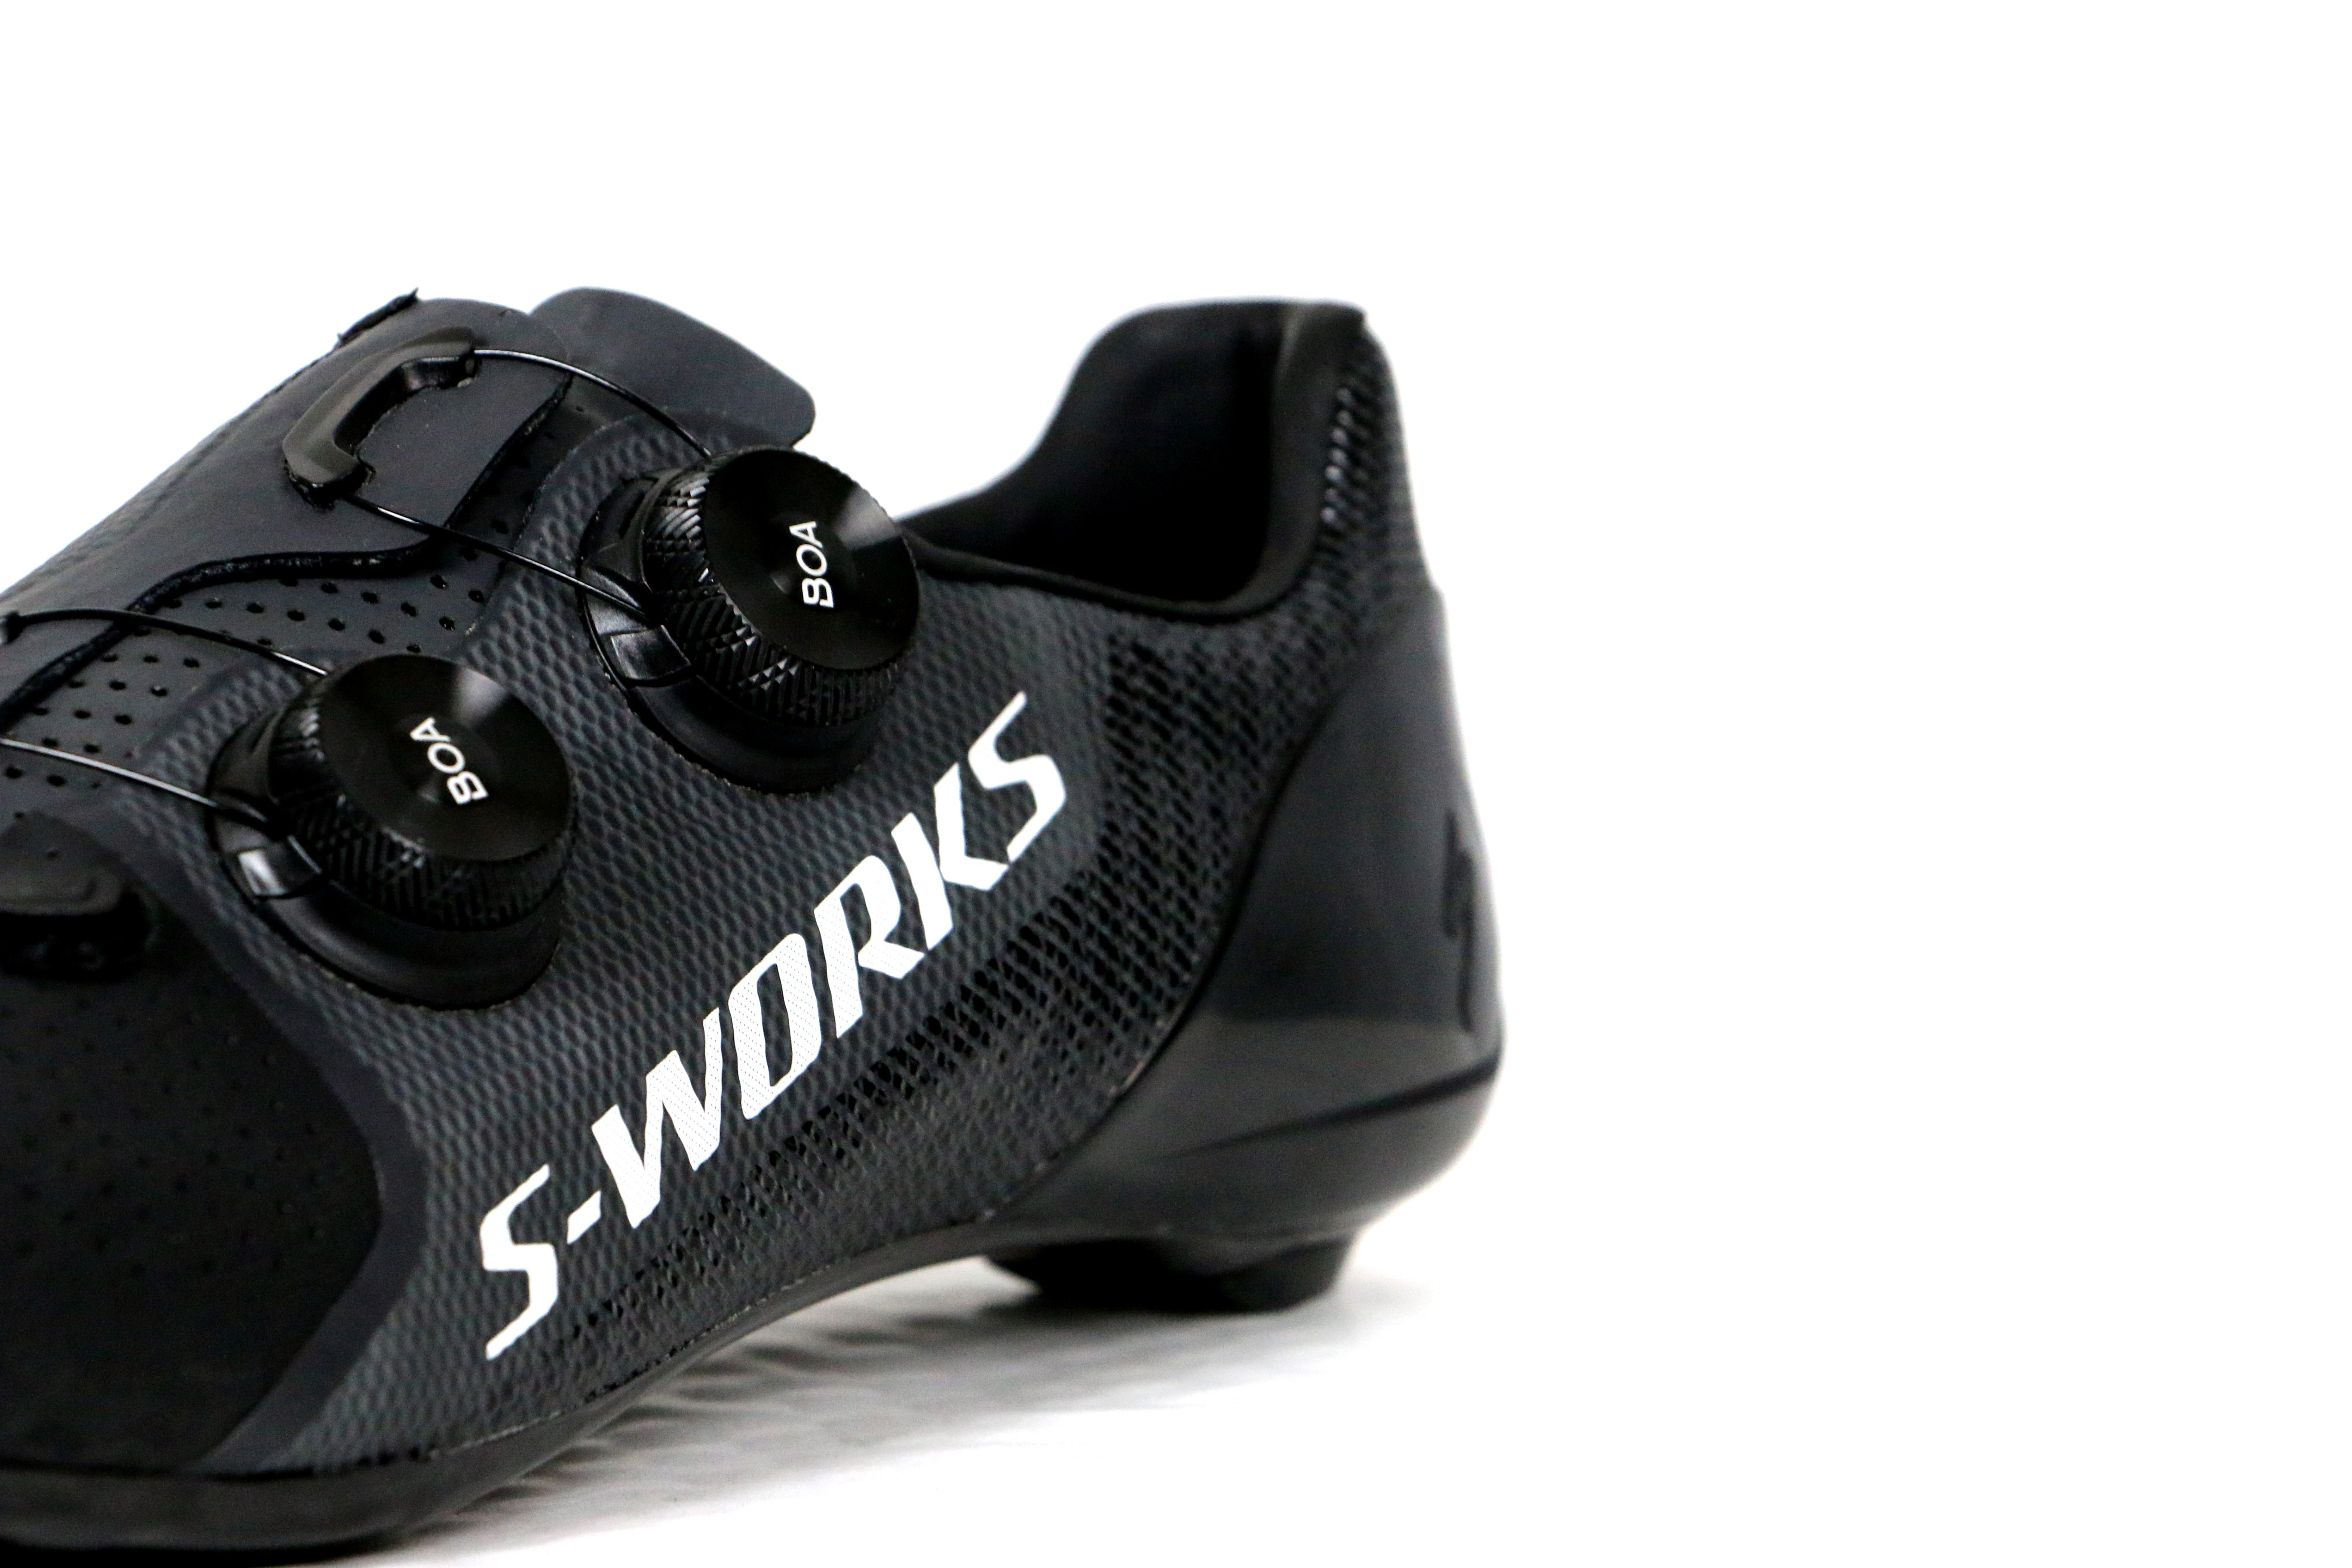 s works 7 road shoes review